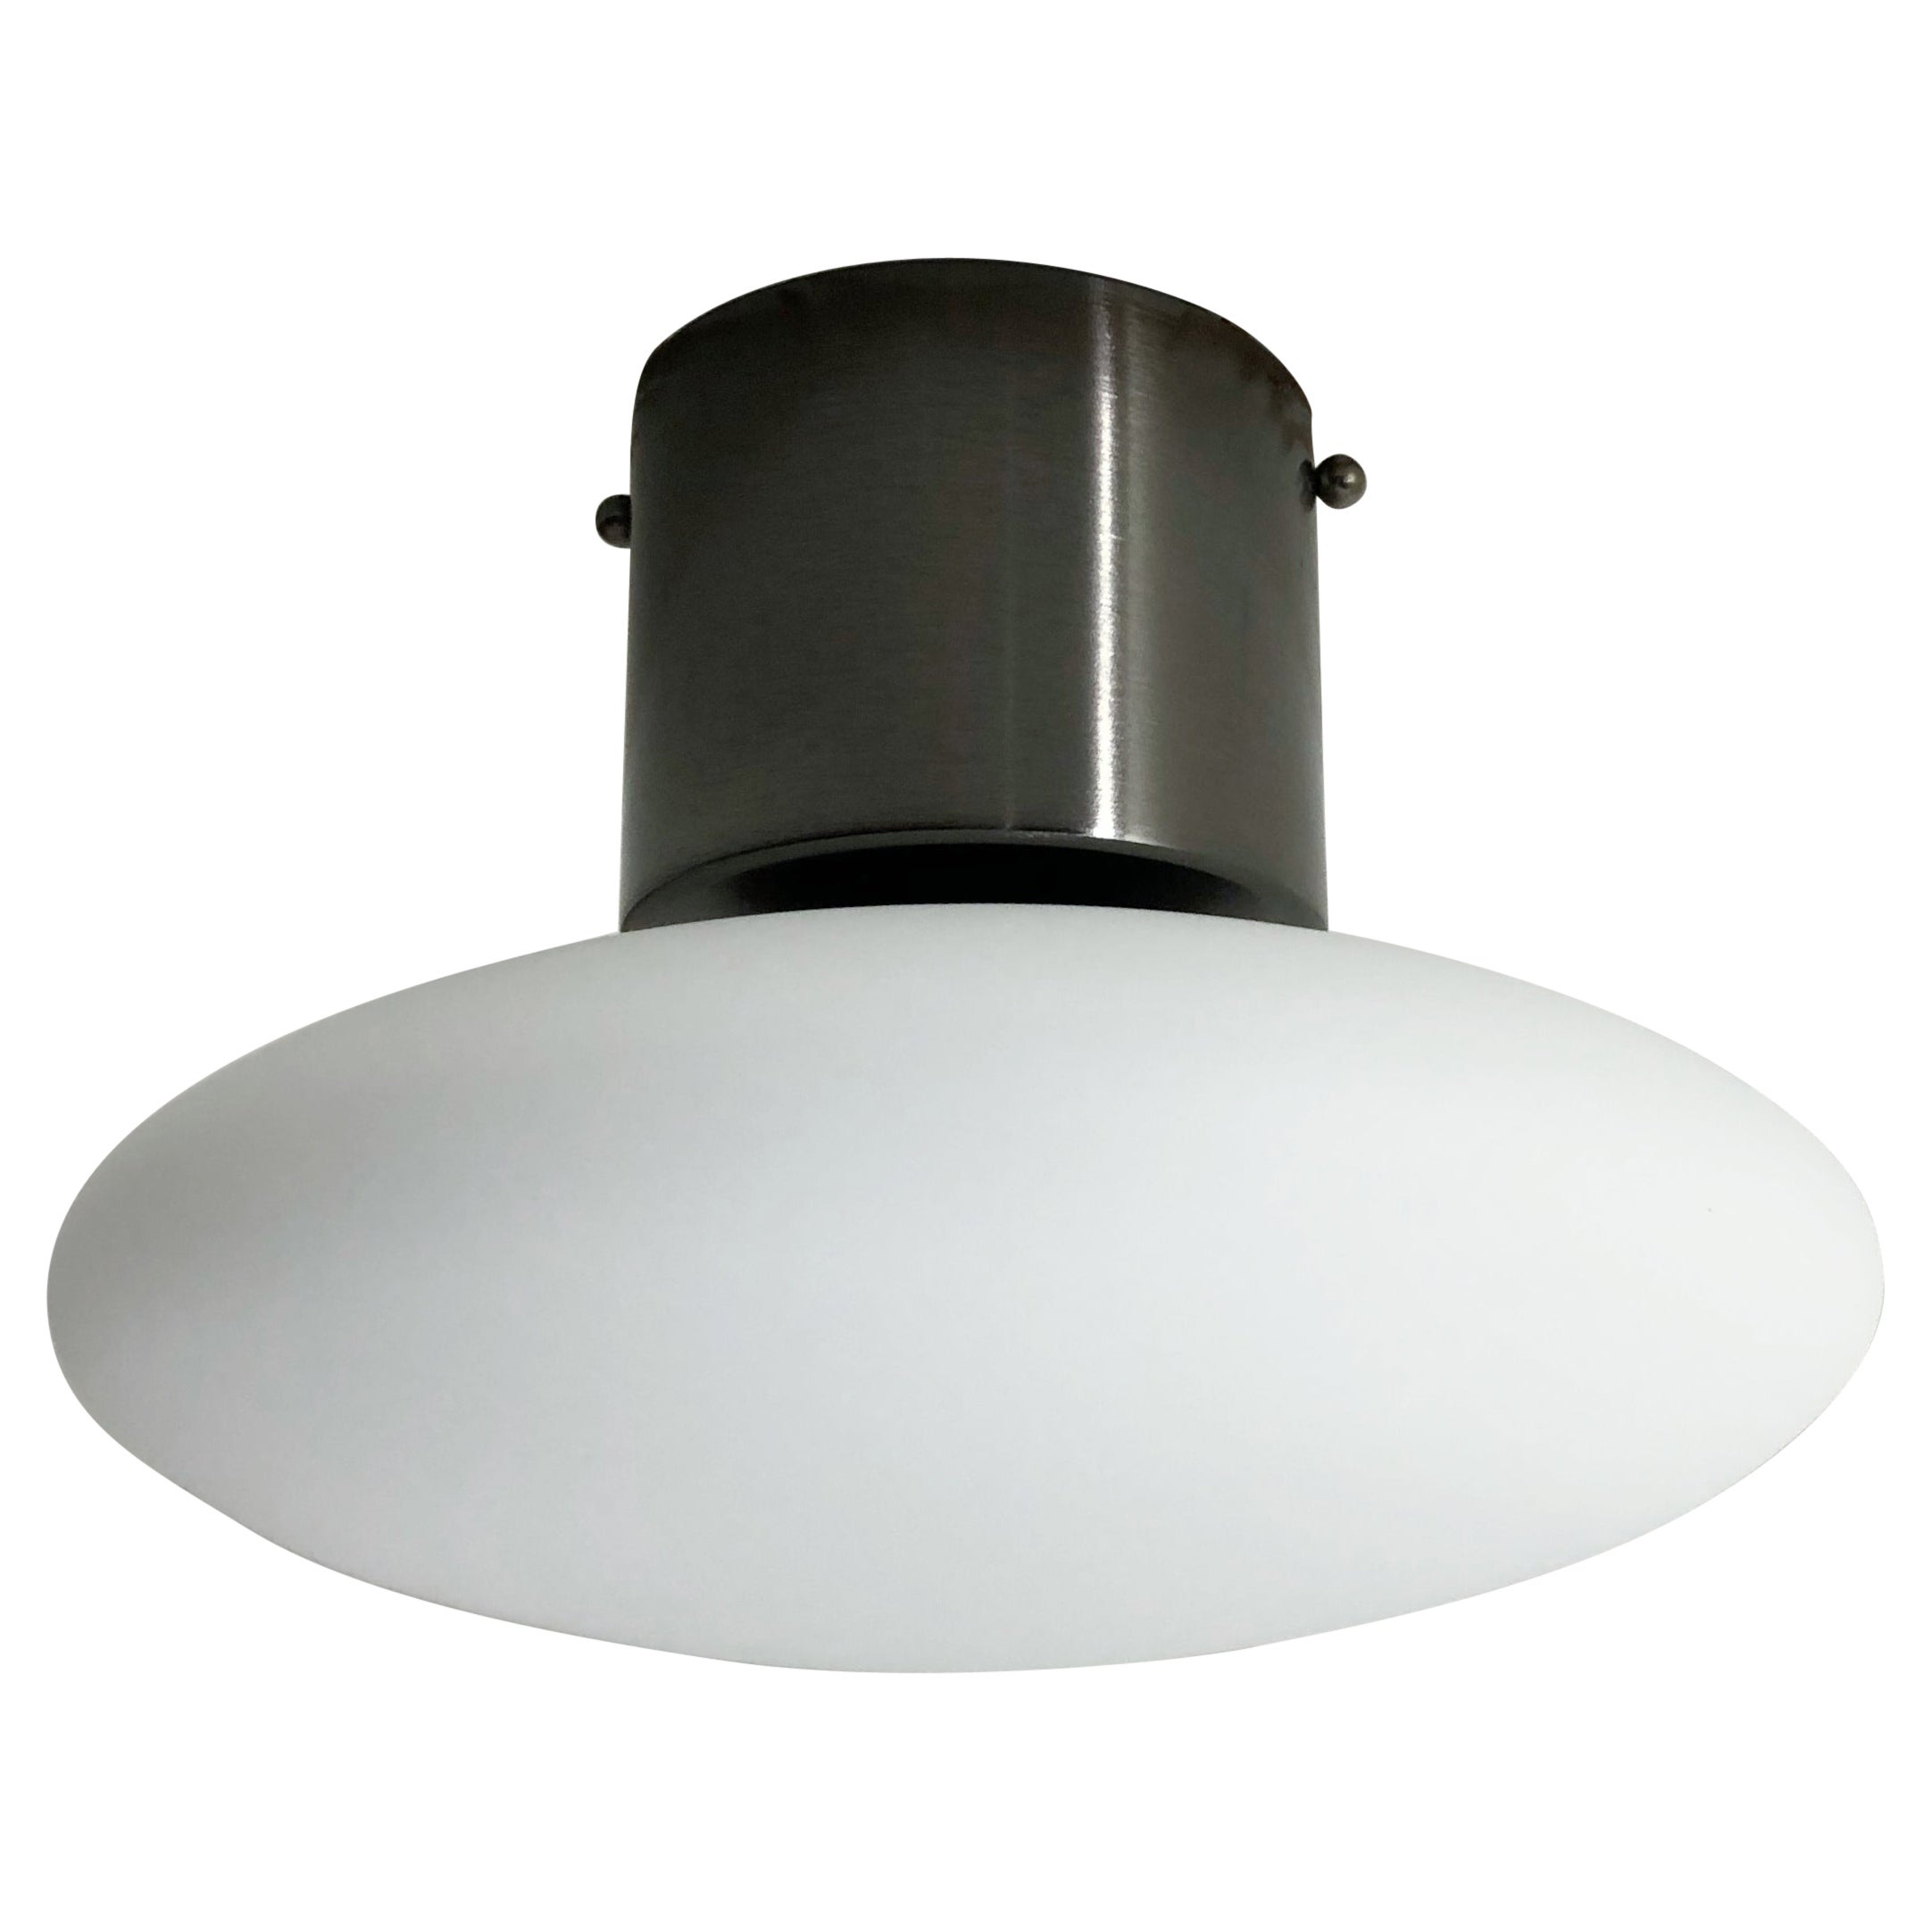 UNO SHADE Sconce / Flush Mount by Fabio Ltd For Sale